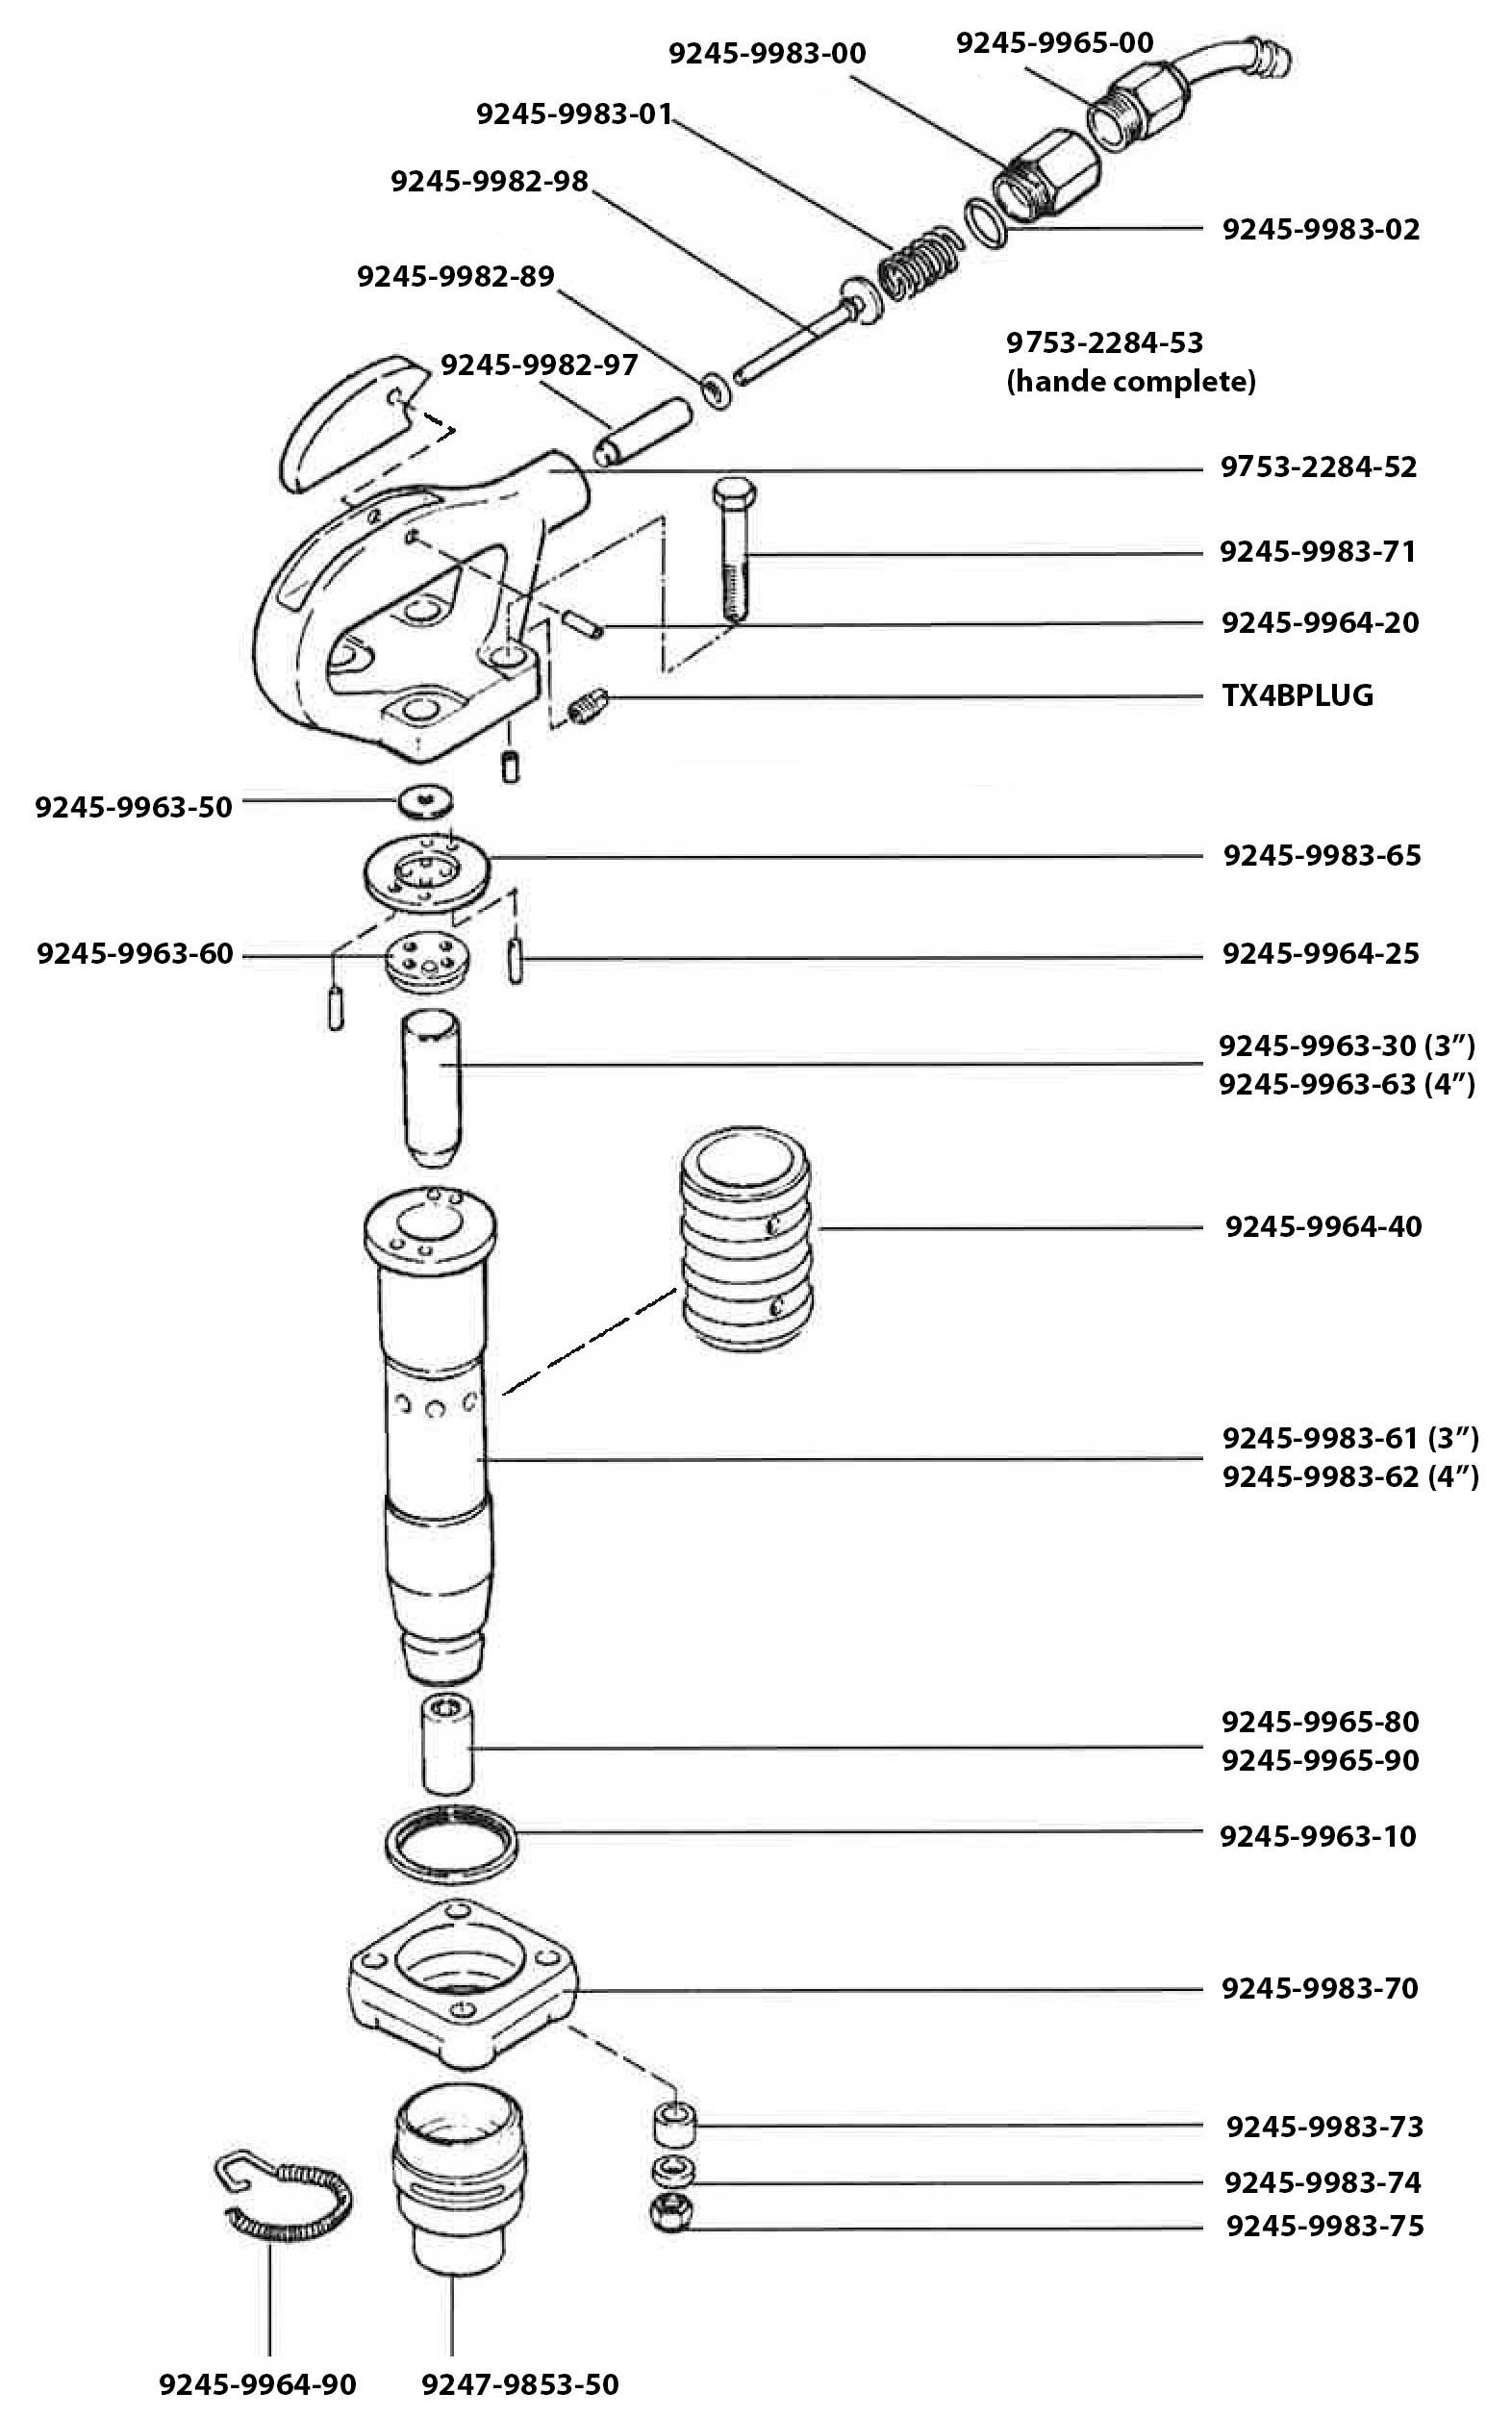 CP 4133 & 4133-4 Schematic & Replacement Parts for Chicago Pneumatic - Models 4133 & 4133-4 - Chipping Hammer